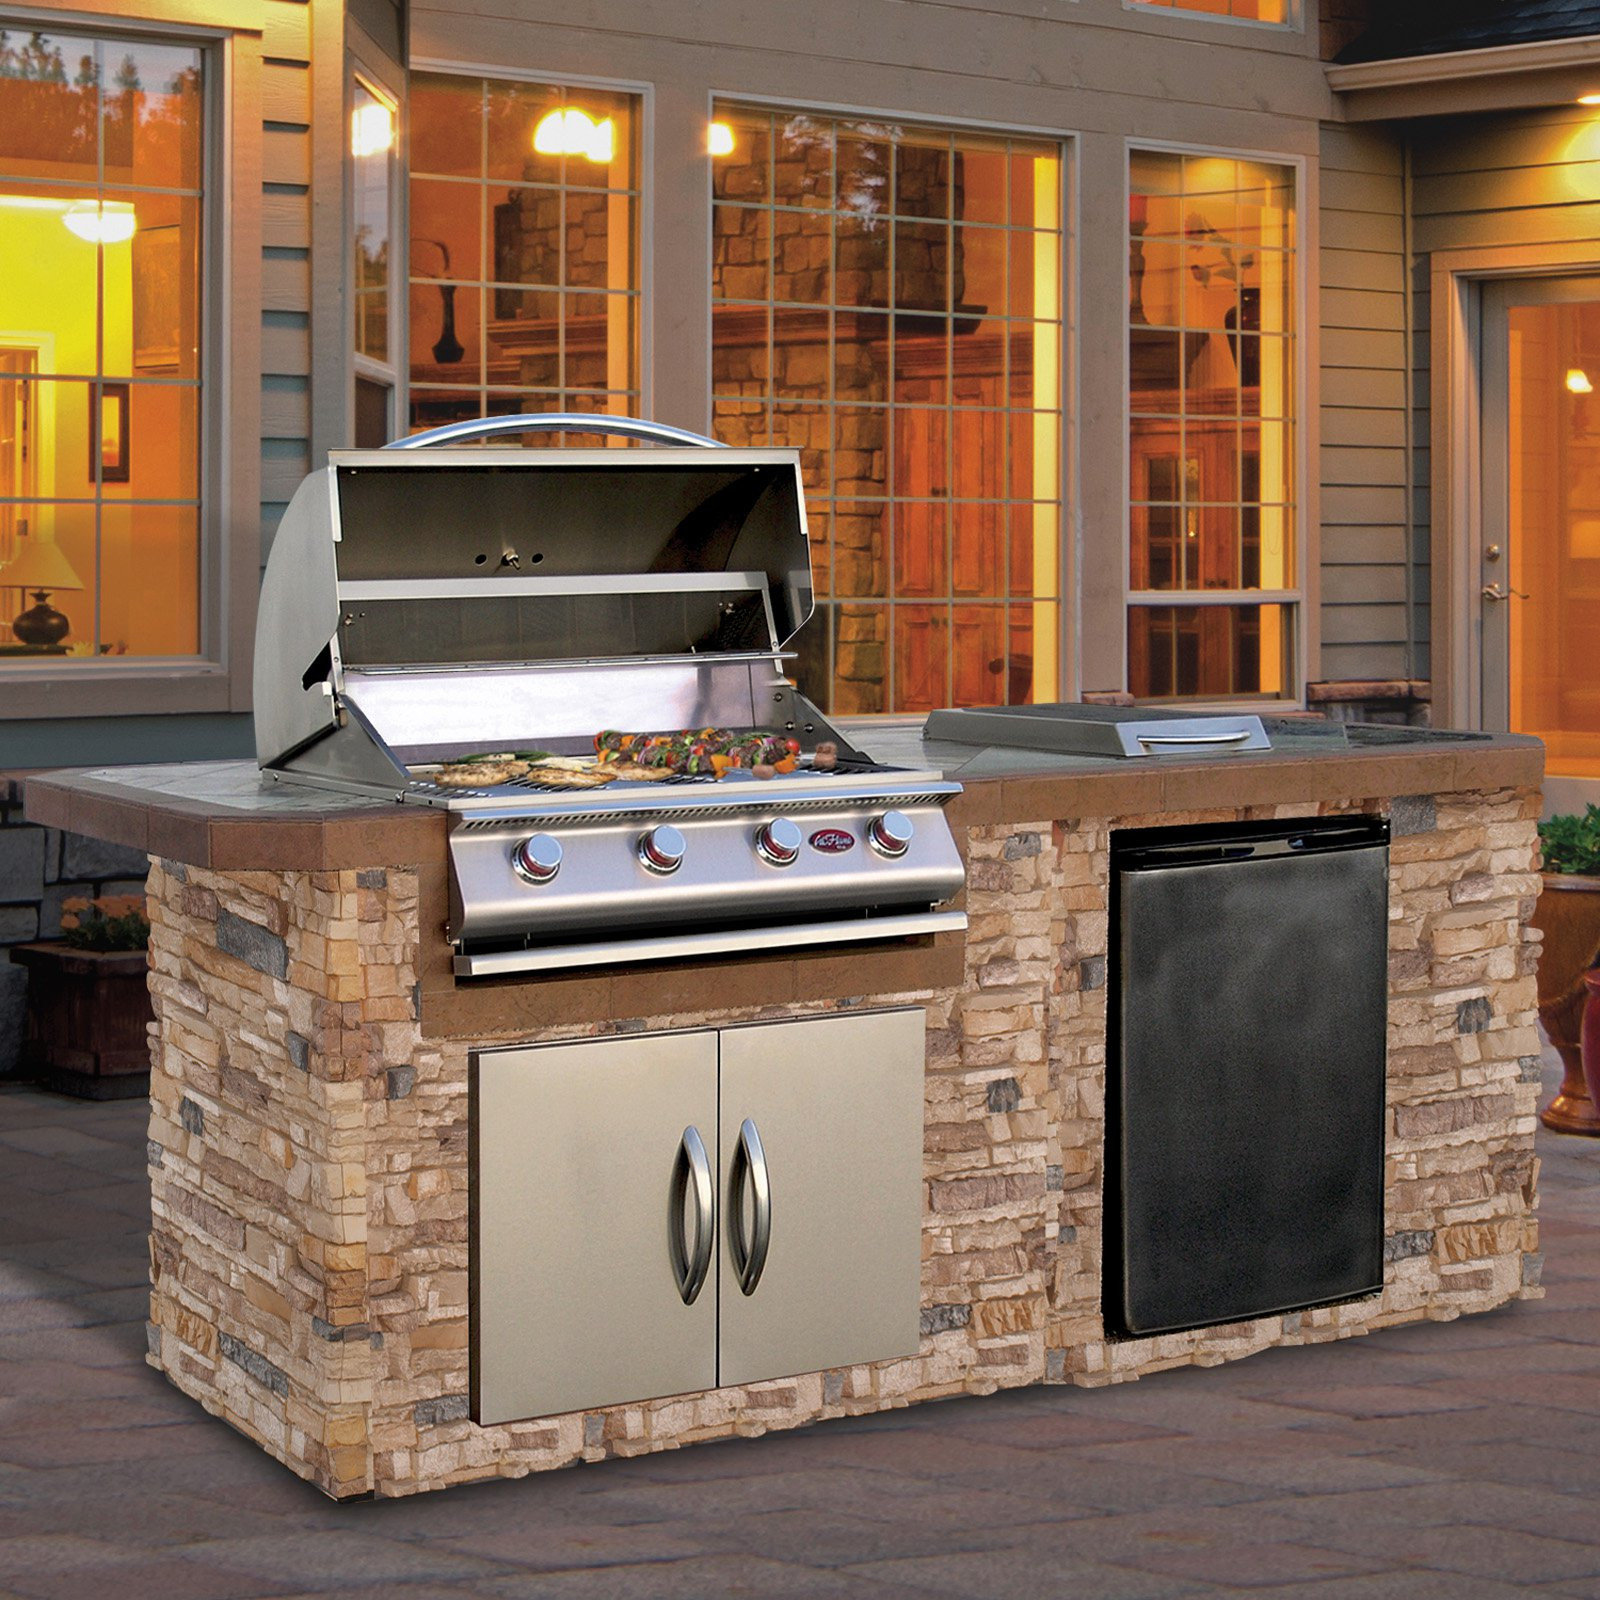 Outdoor Grill Kitchen
 Cal Flame 7 ft Natural Stone Grill Island With Tile Top